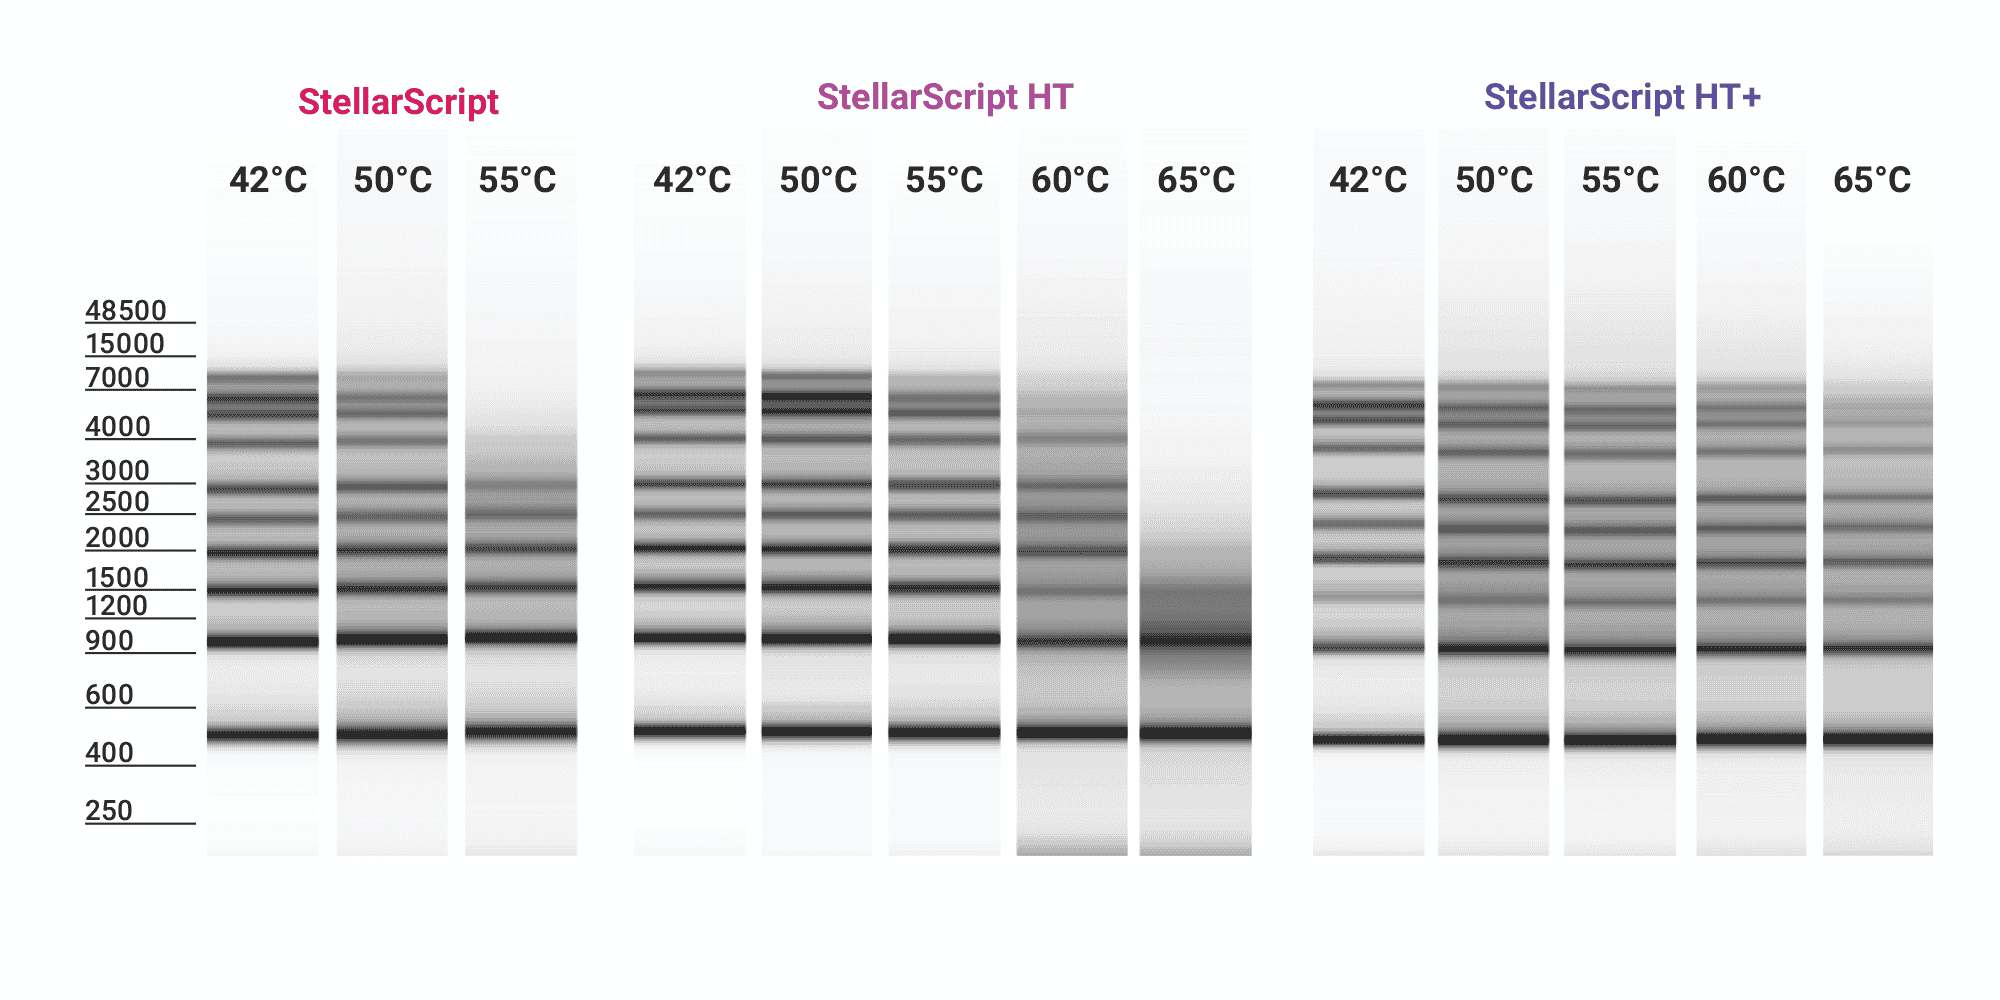 Figure 1A. Overcome RNA template secondary structure with thermostable RTs.  StellarScript, StellarScript HT, and StellarScript HT+ were run in oligo-dT-primed first strand synthesis for 30 minutes using a 0.5 to 9 kb RNA ladder, as indicated. Reverse transcriptase thermostability increases from StellarScript to StellarScript HT and StellarScript HT+.